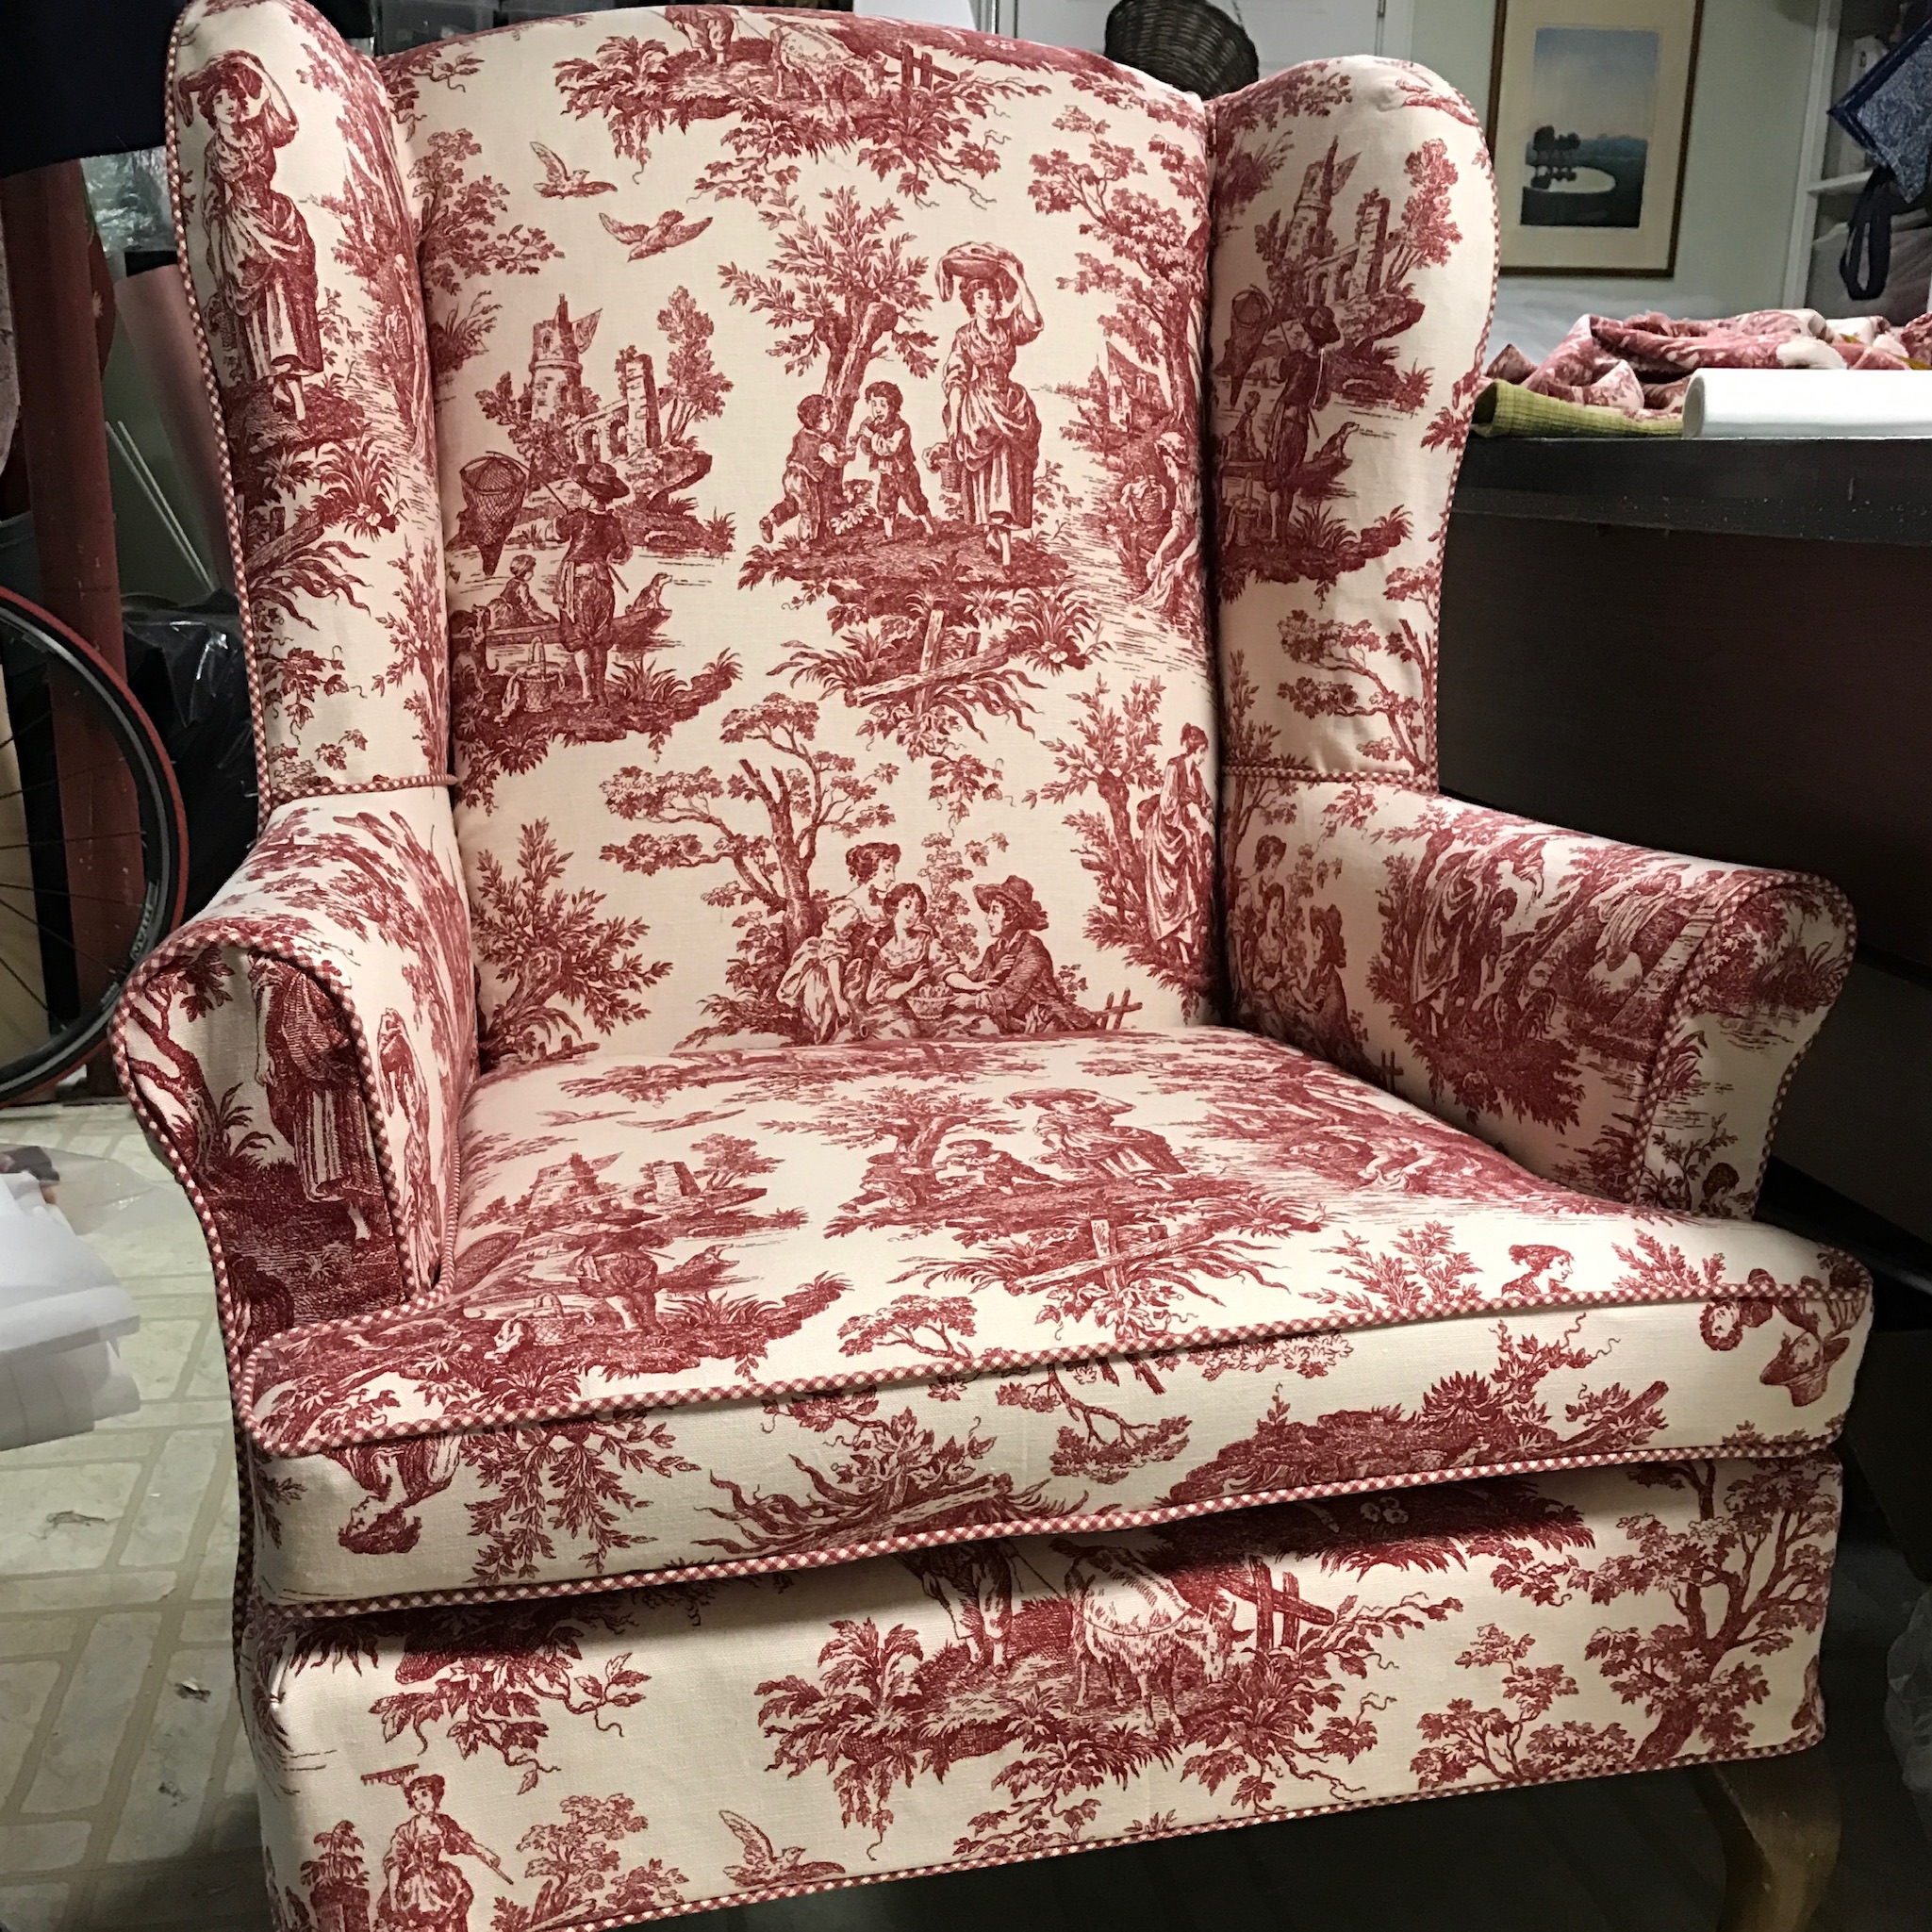 Slipcovered Red Toille Chair